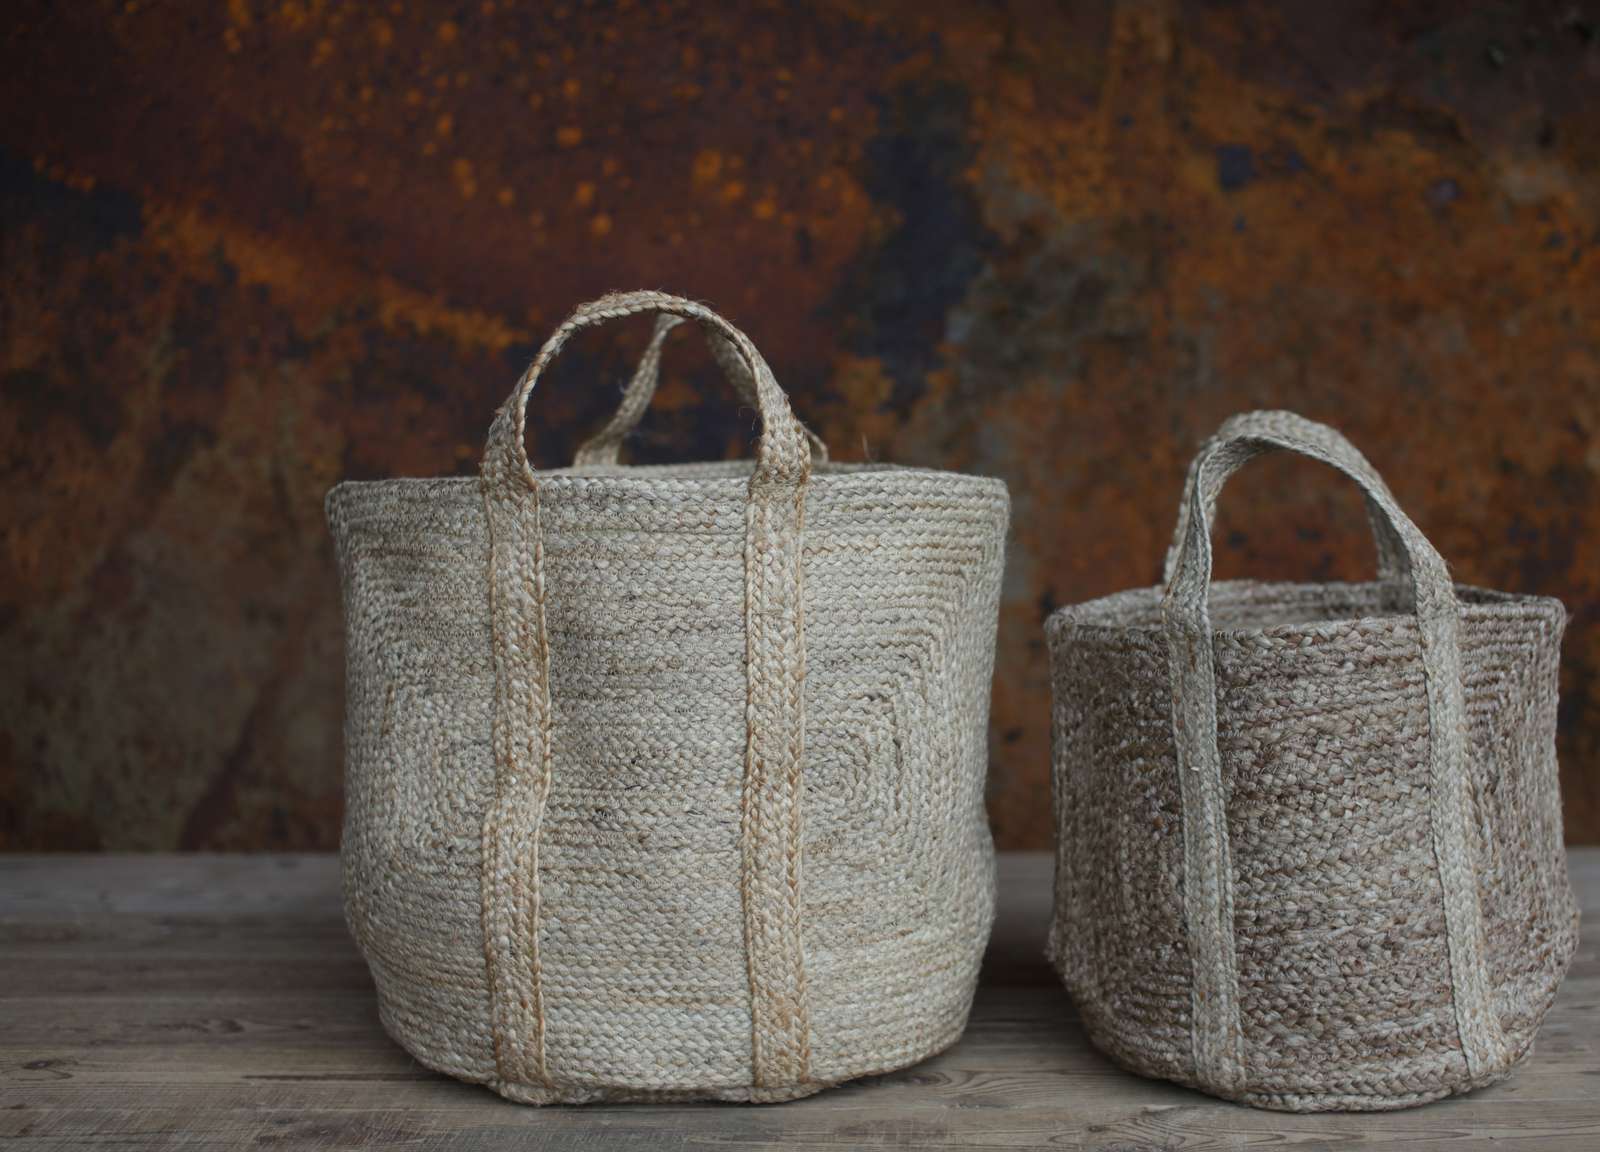 Two natural, braided hemp storage bags. One Large, one small, with handles, standing on a wooden surface with a rusty background.